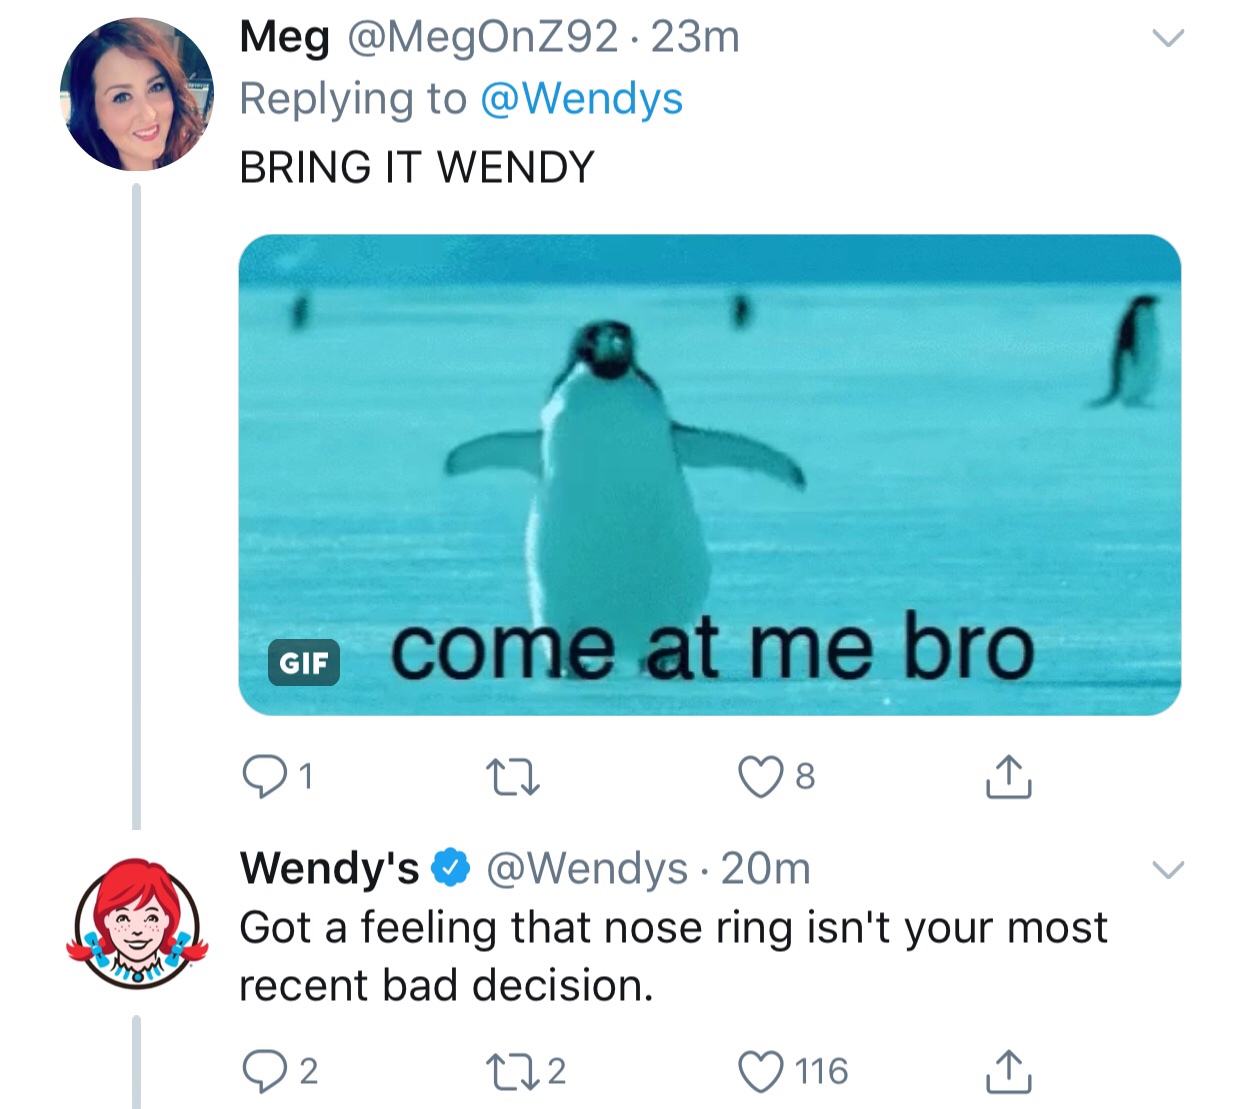 tweet - wendy's company - Meg 23m Bring It Wendy Gif come at me bro 21 22 8 Wendy's ~ 20m Got a feeling that nose ring isn't your most recent bad decision. 02 272 116 1